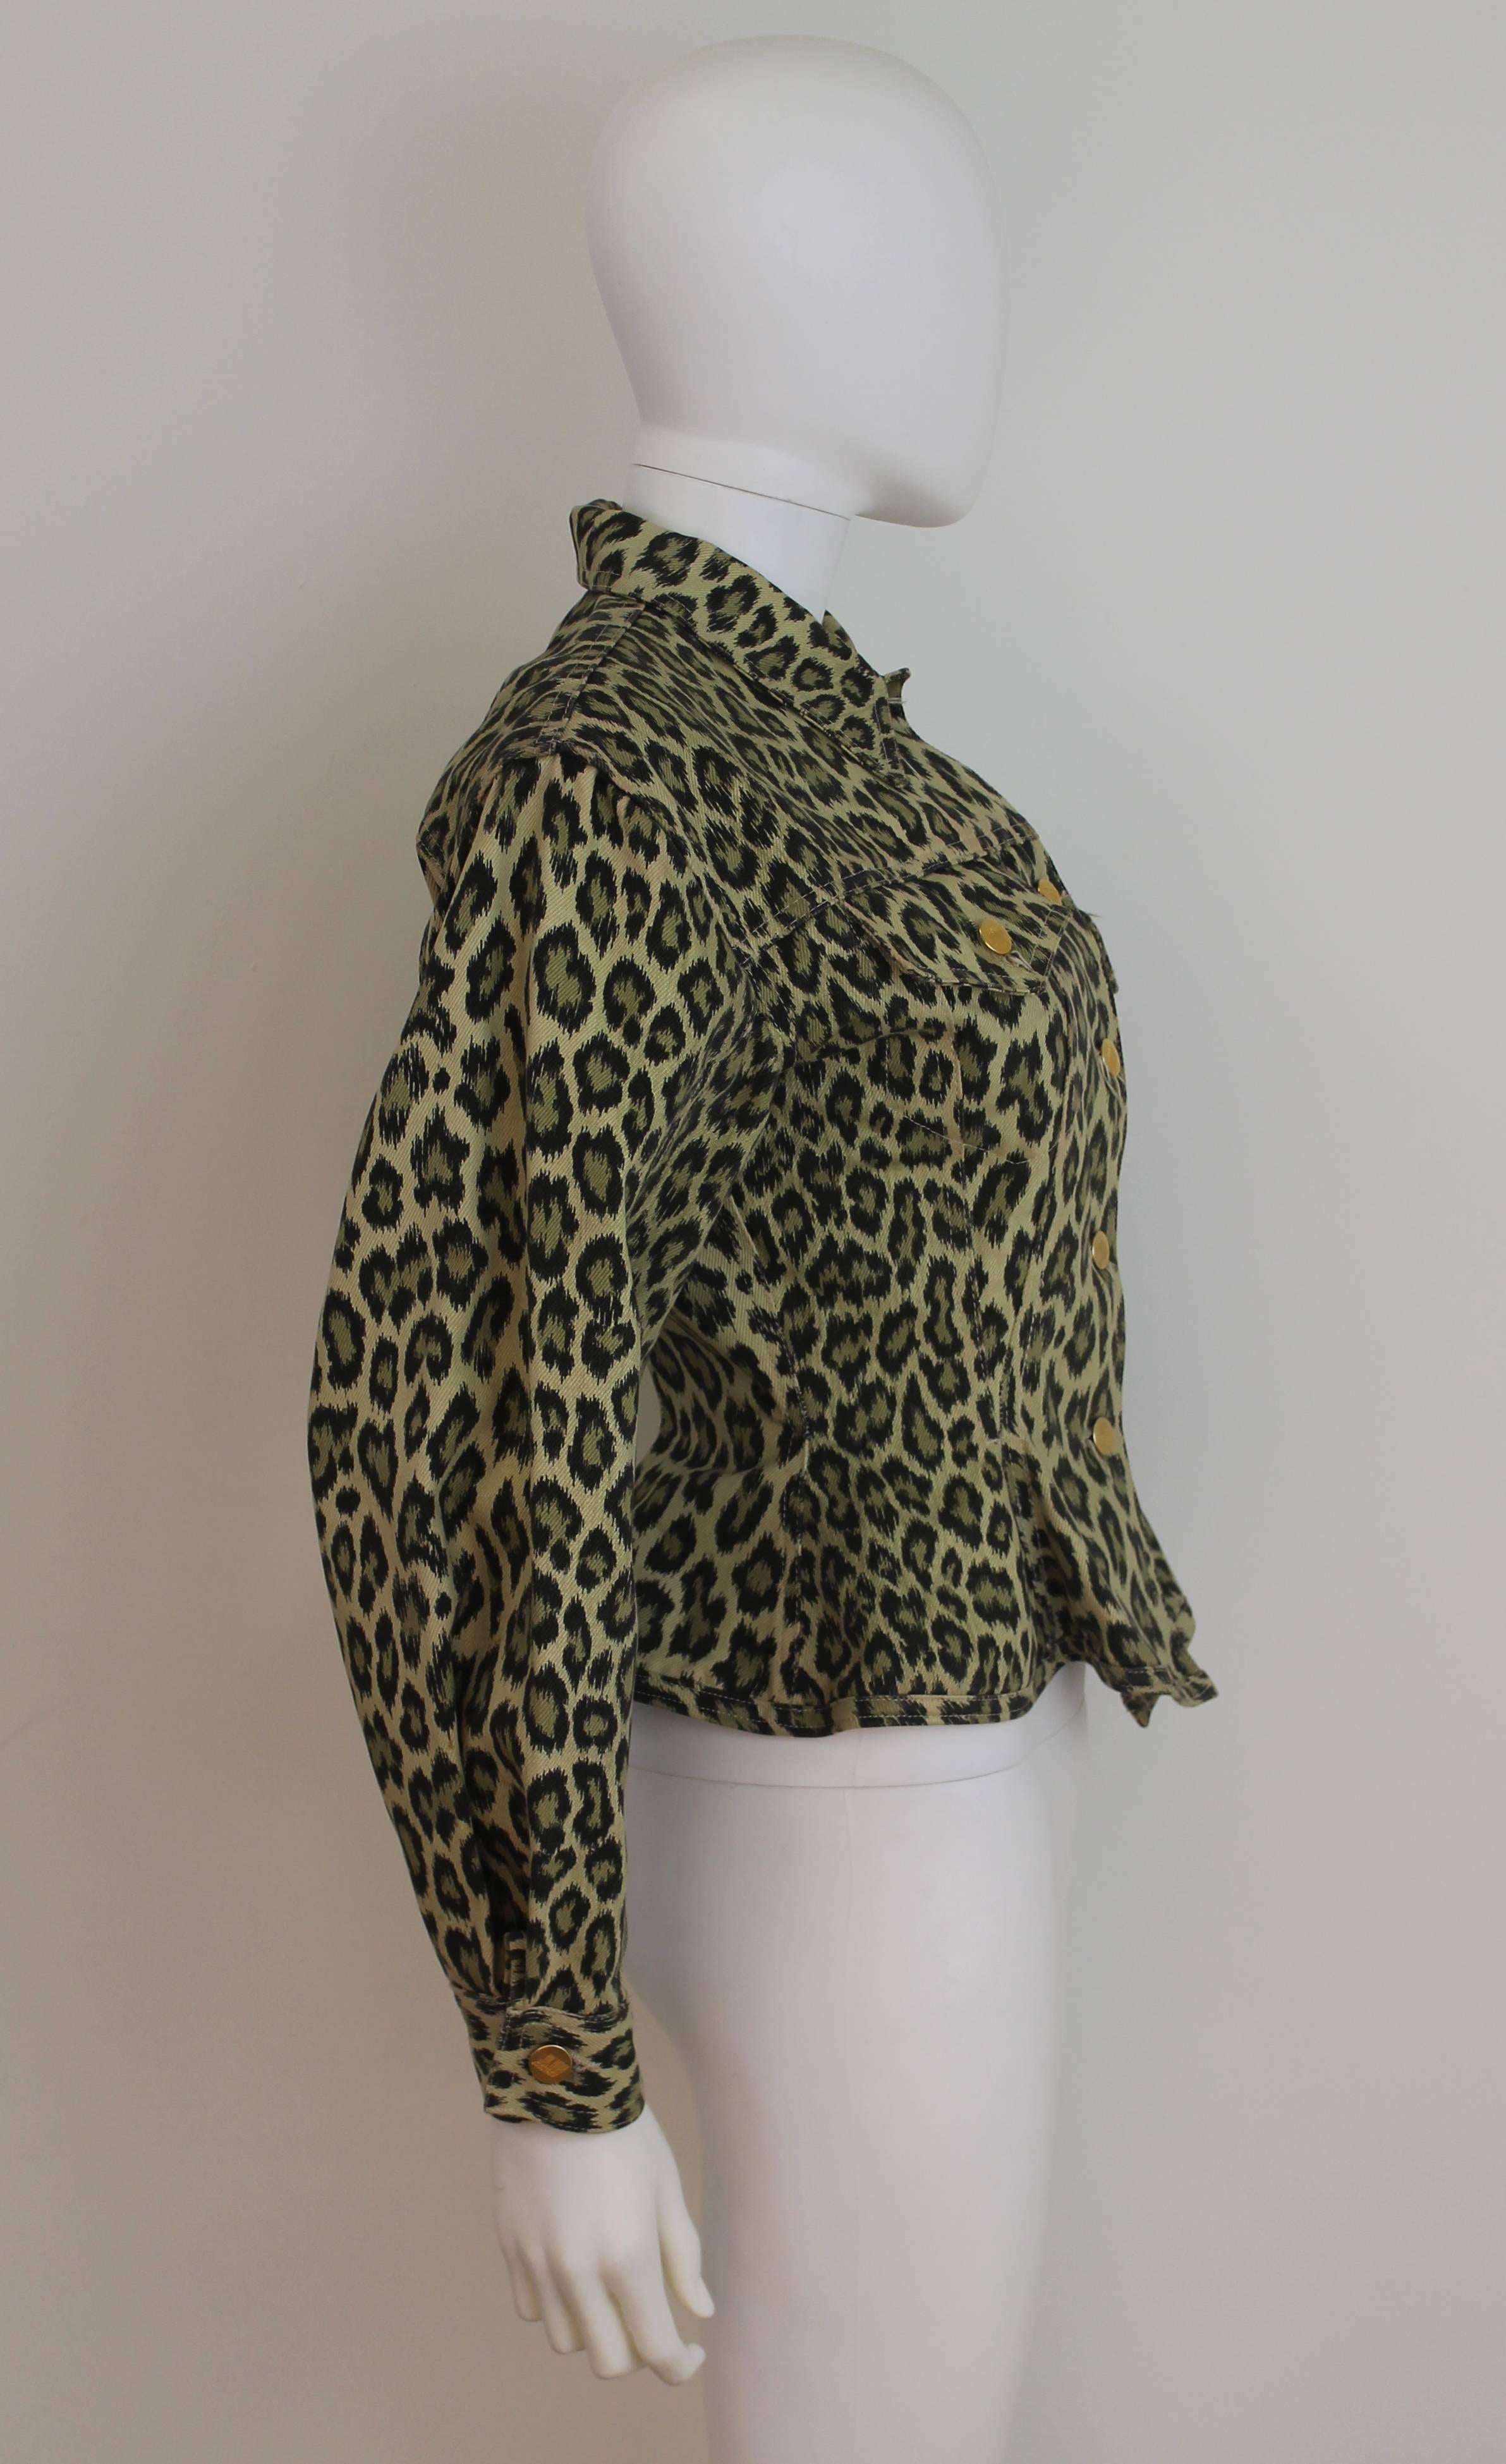 Iconic Junior Gaultier leopard print jacket from 1988 with lightly flared peplum detailing around the hip. Features Junior Gaultier logo buttons and two patch pockets at the bust.